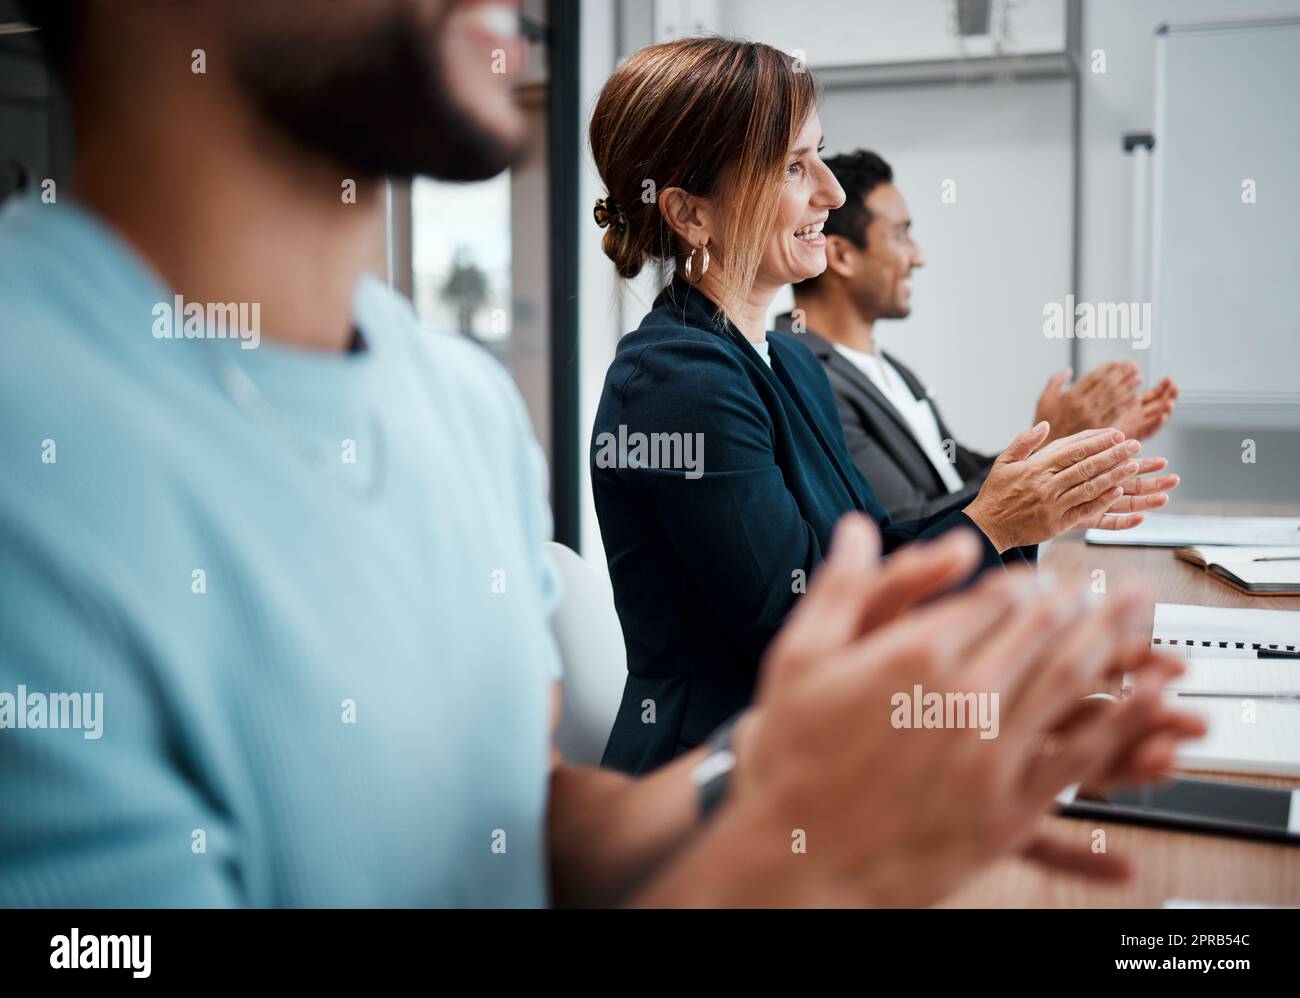 Weve finally reached our goals. a group of coworkers clapping during a business meeting. Stock Photo